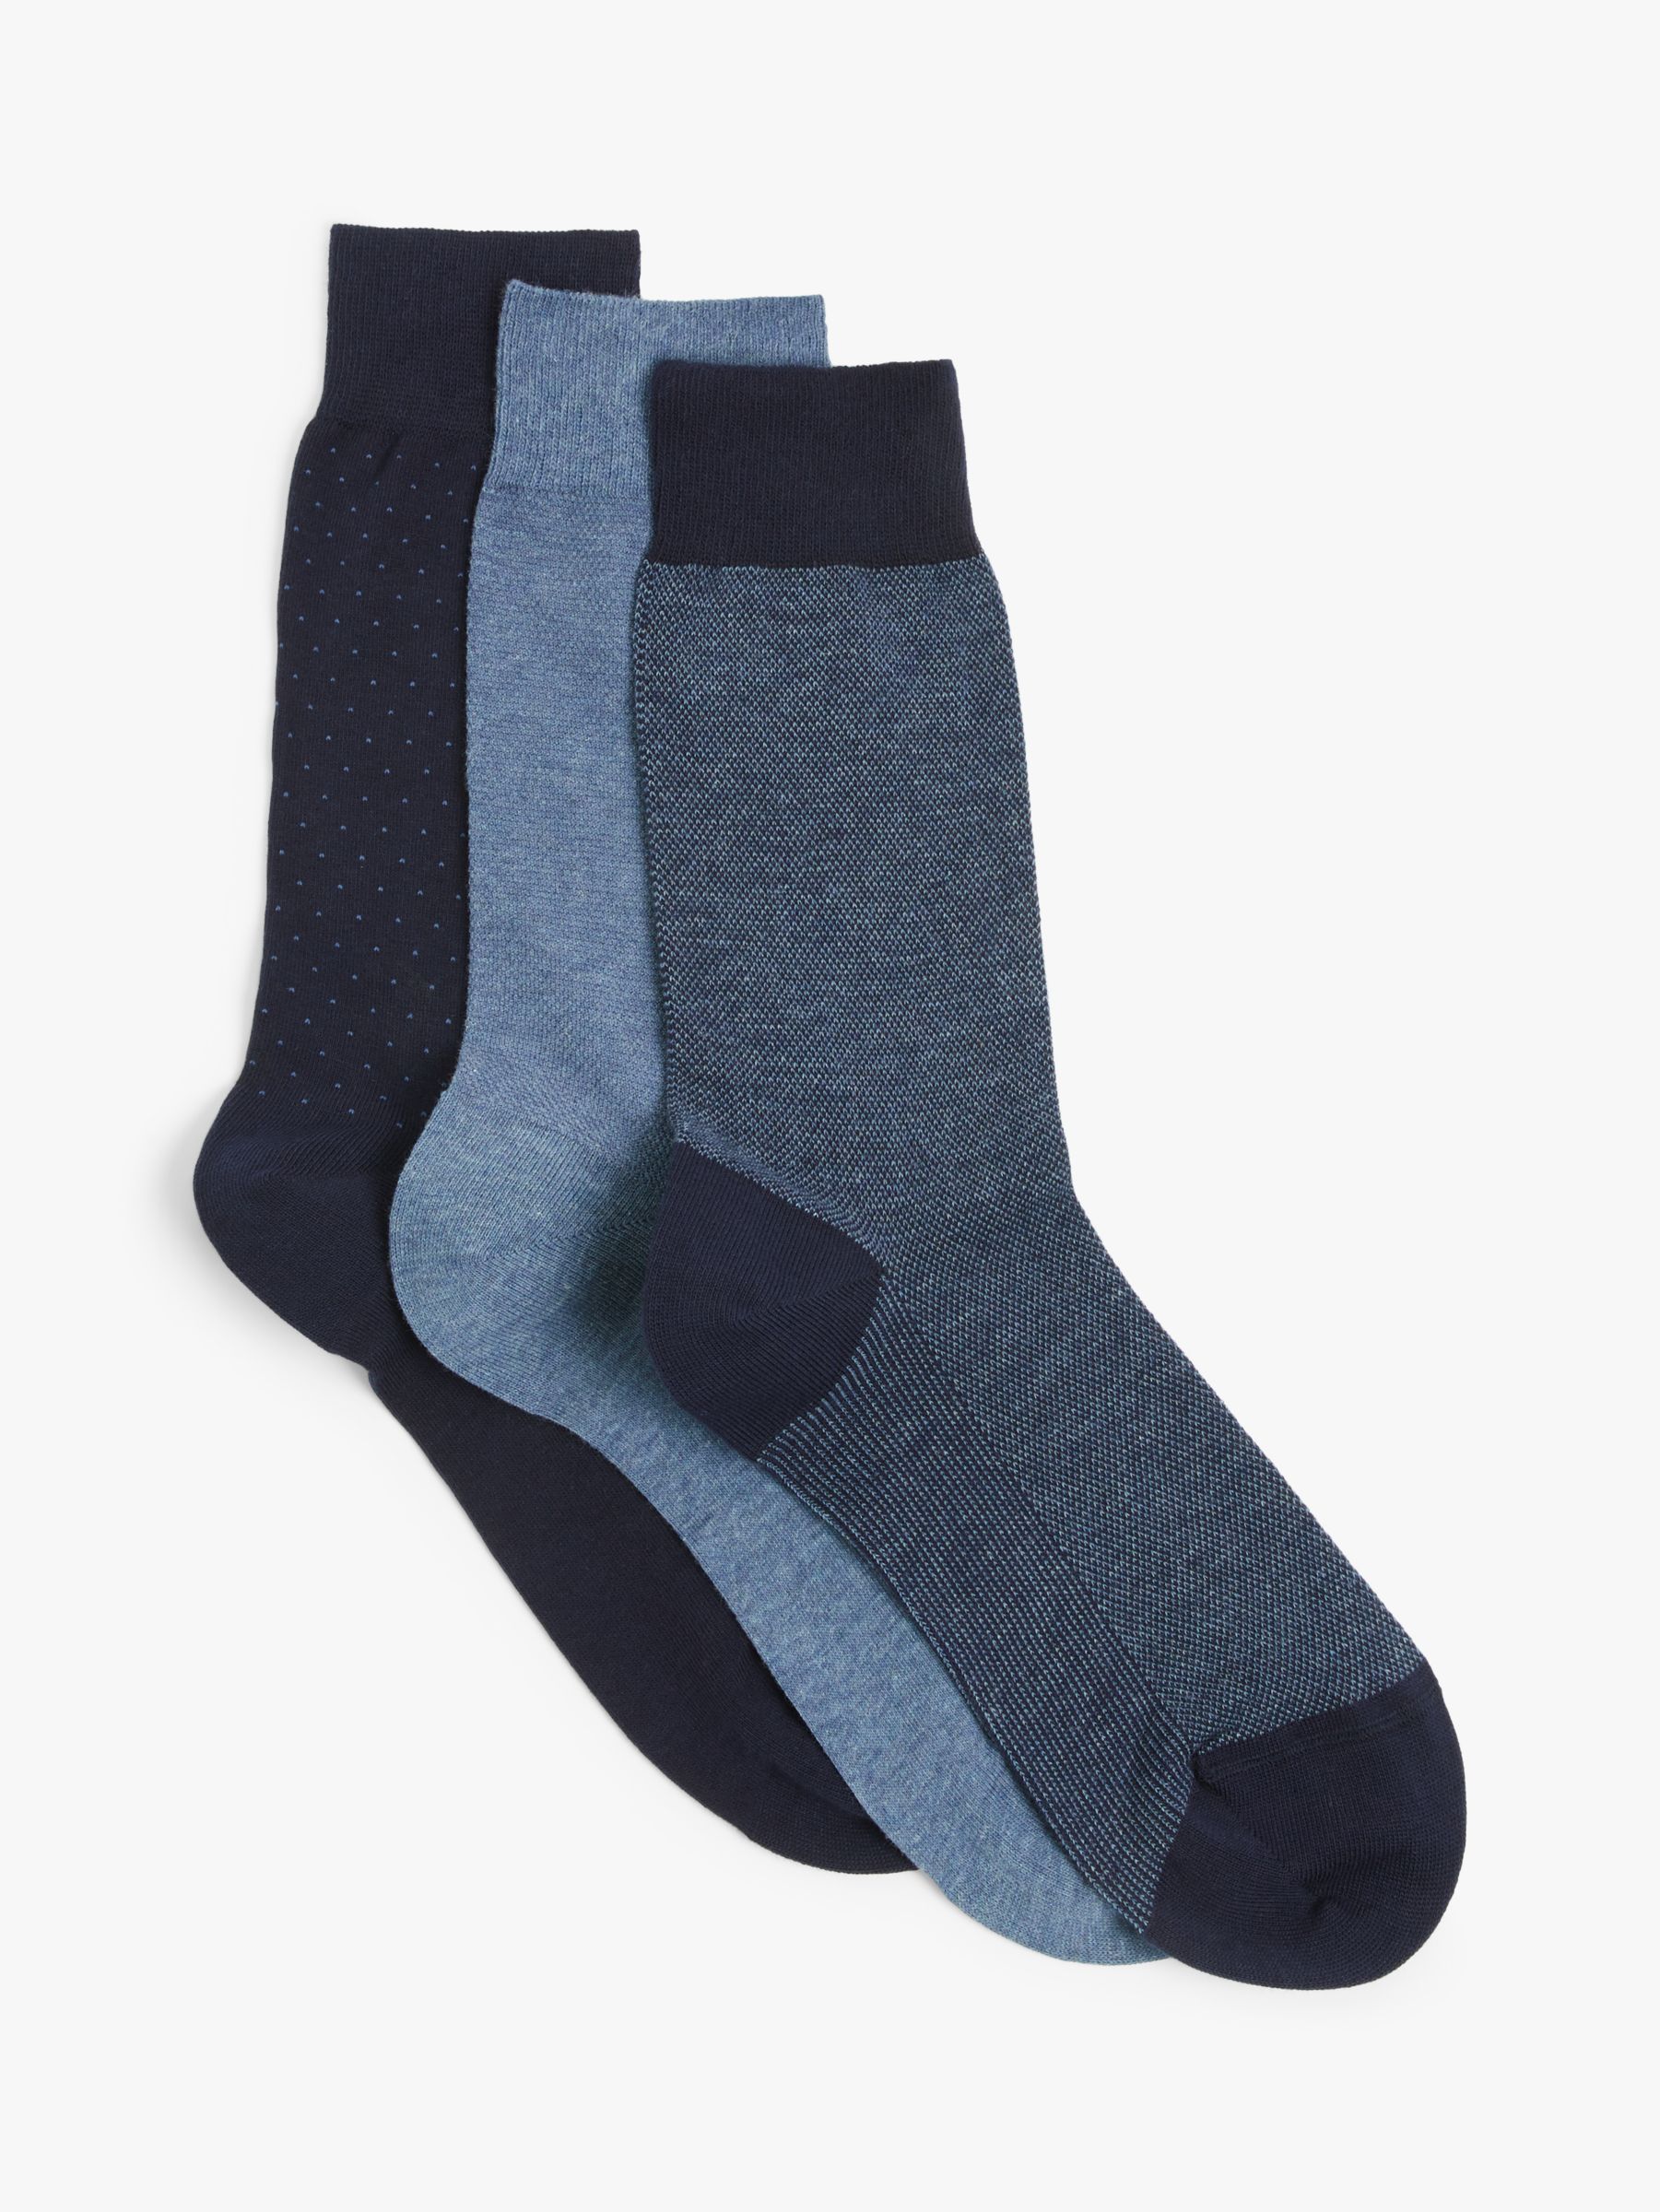 John Lewis Made in Italy Cotton Patterned Socks, Pack of 3, Blue/Navy, S